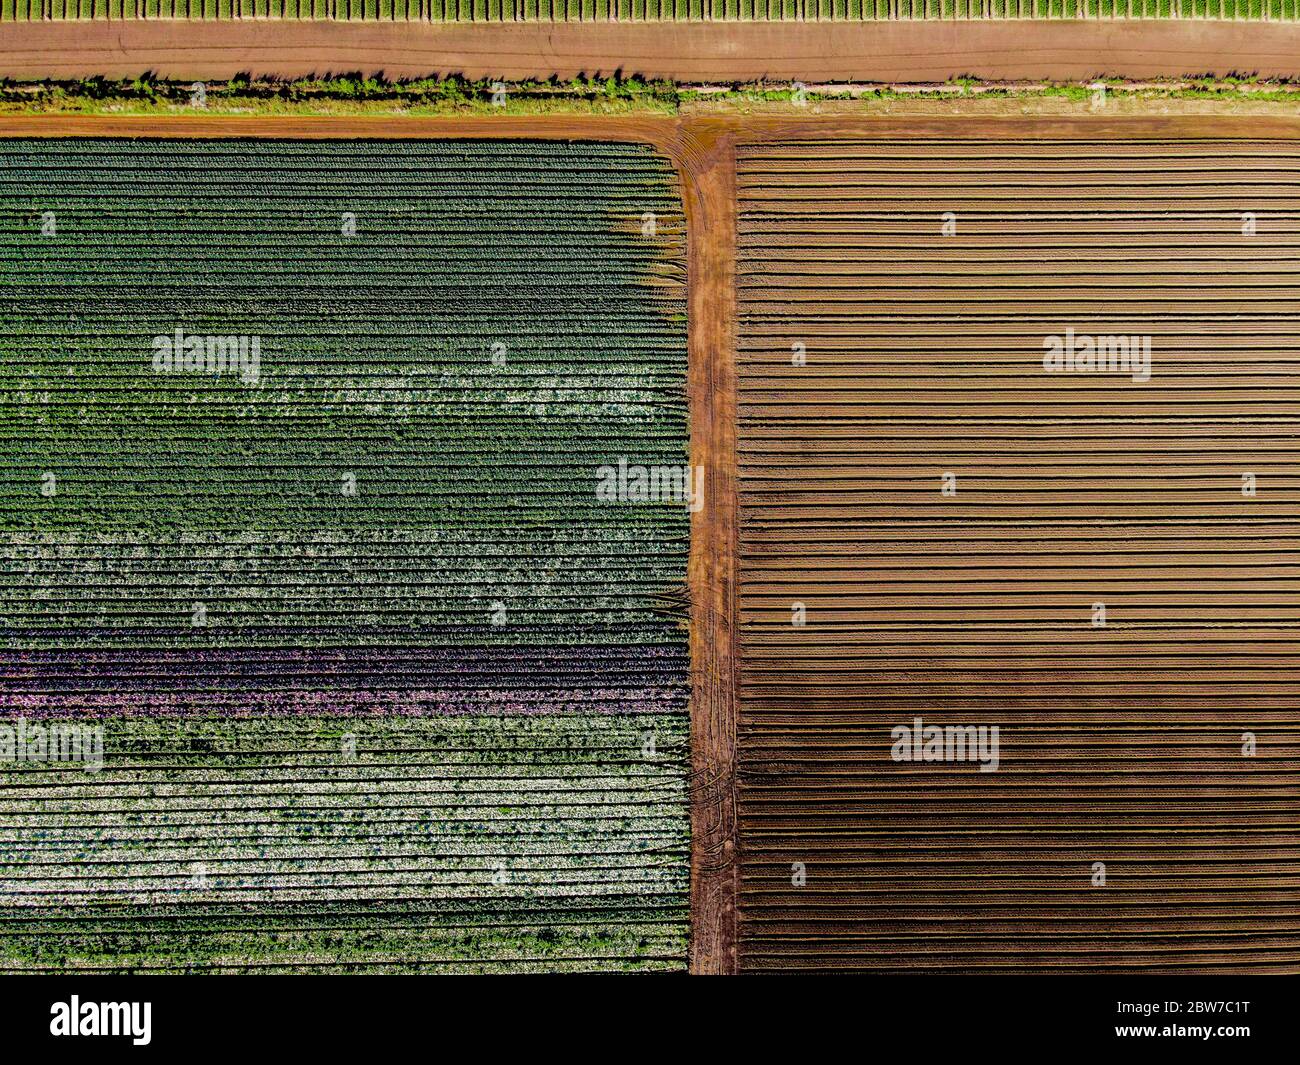 Aerial photography view of Werribee South fertile farm farmland fields with colourful crops near Werribee River Stock Photo